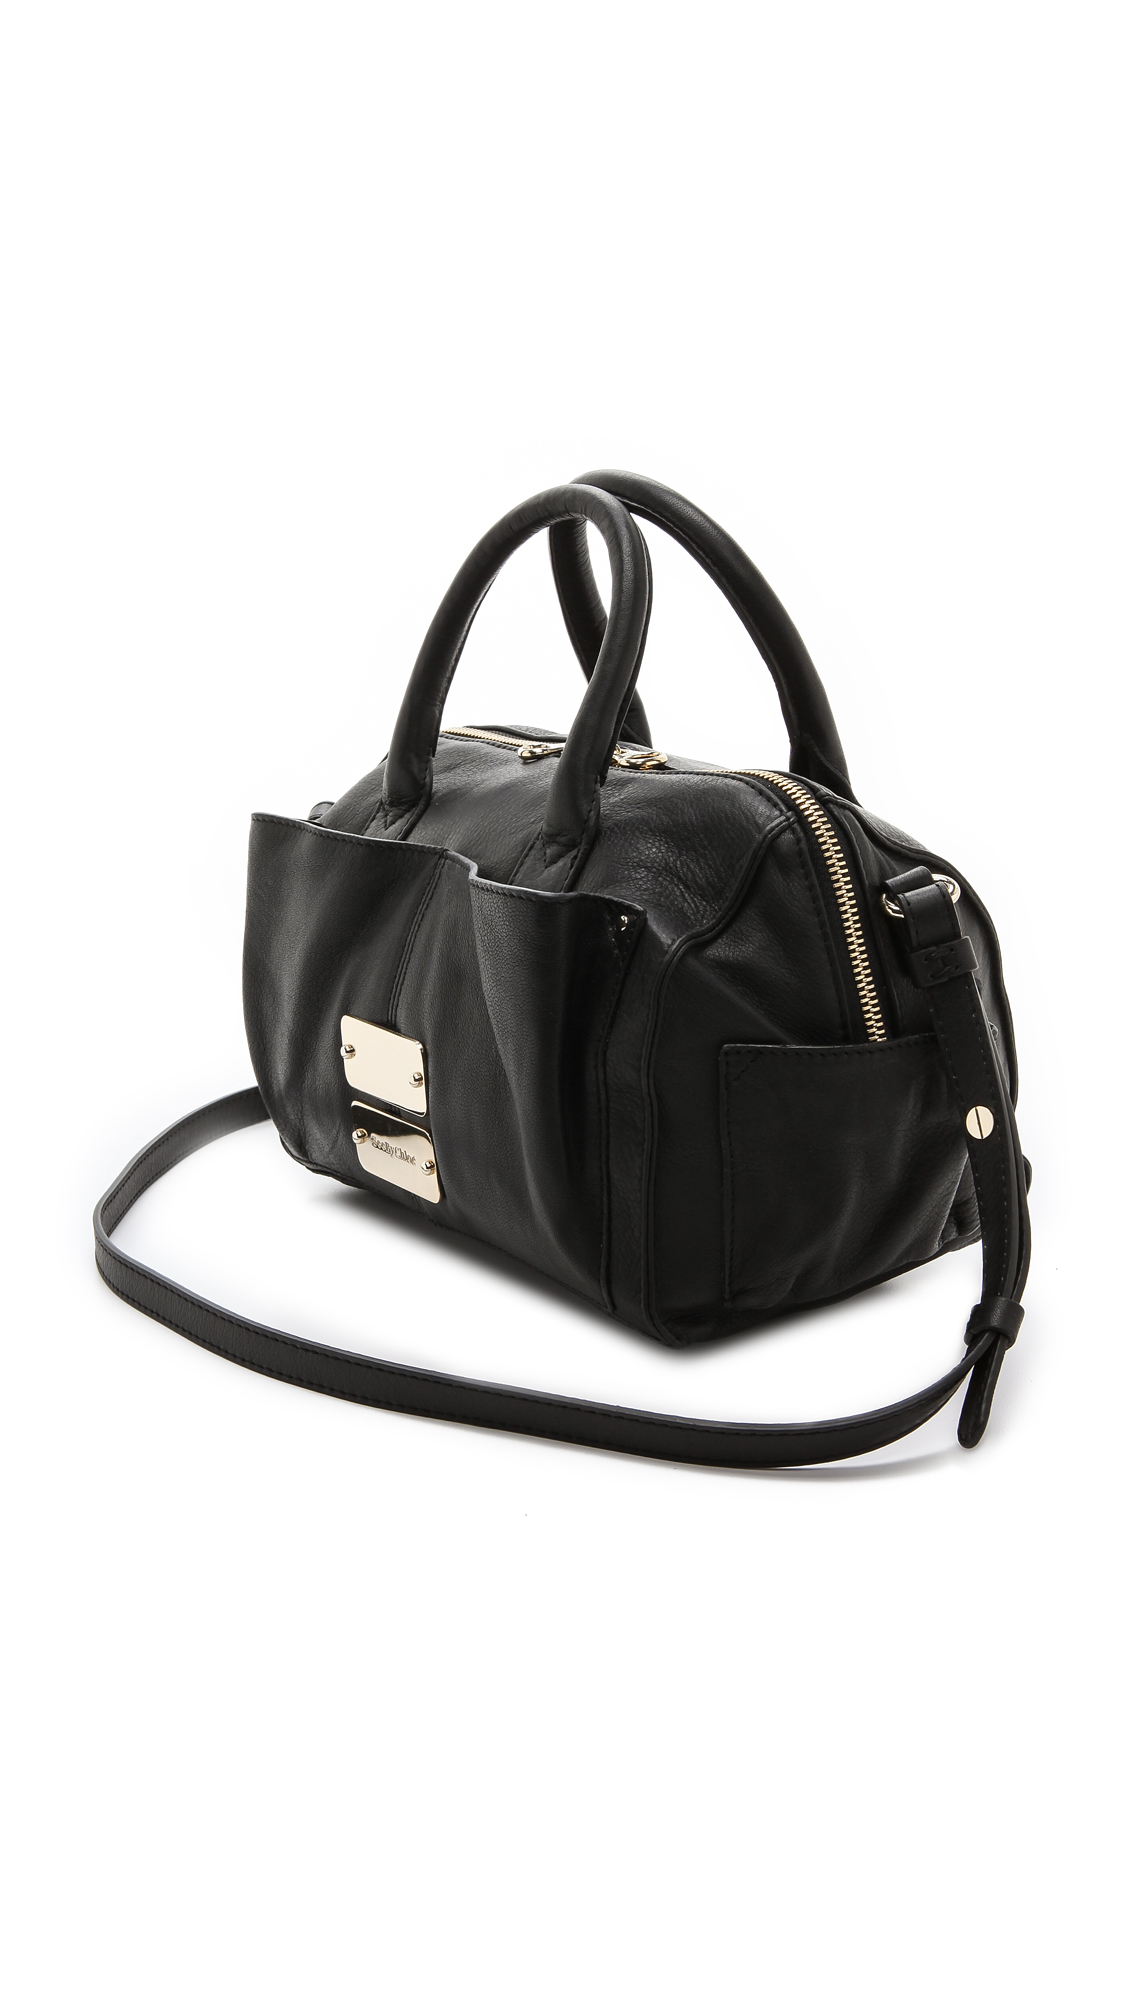 Lyst - See by chloé Nellie Small Handbag With Shoulder Strap - Black/pebble in Black